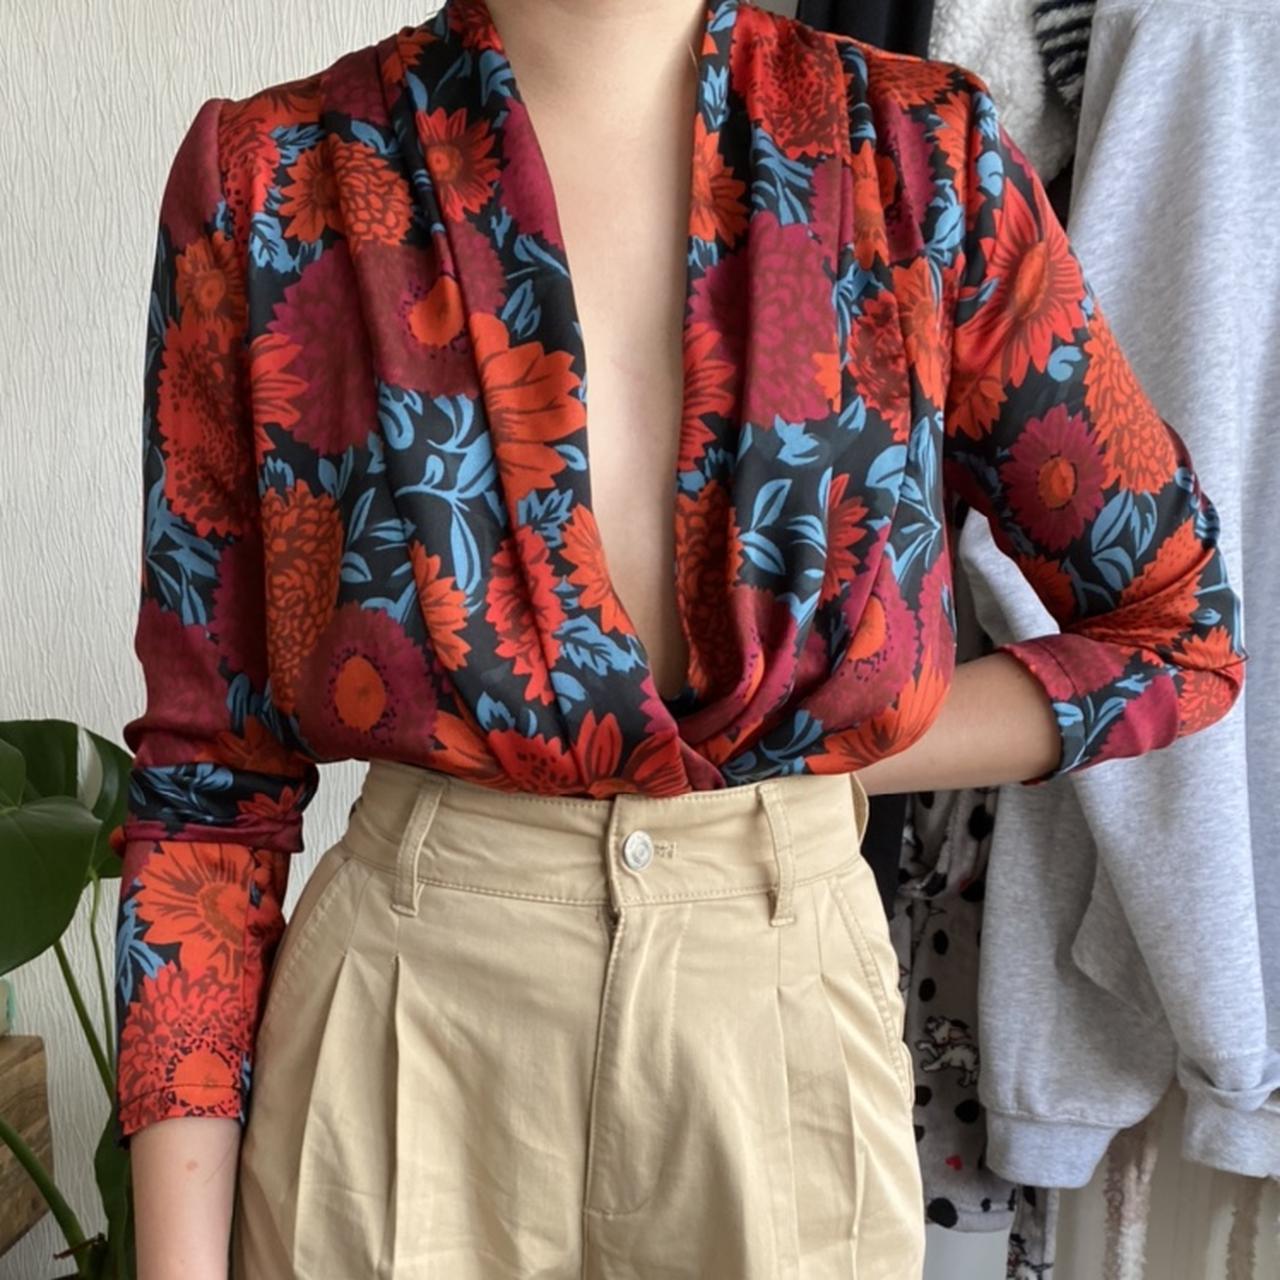 ZARA Red Floral Silky Bodysuit Top with Crossover Neckline - $25 - From  Ashleigh